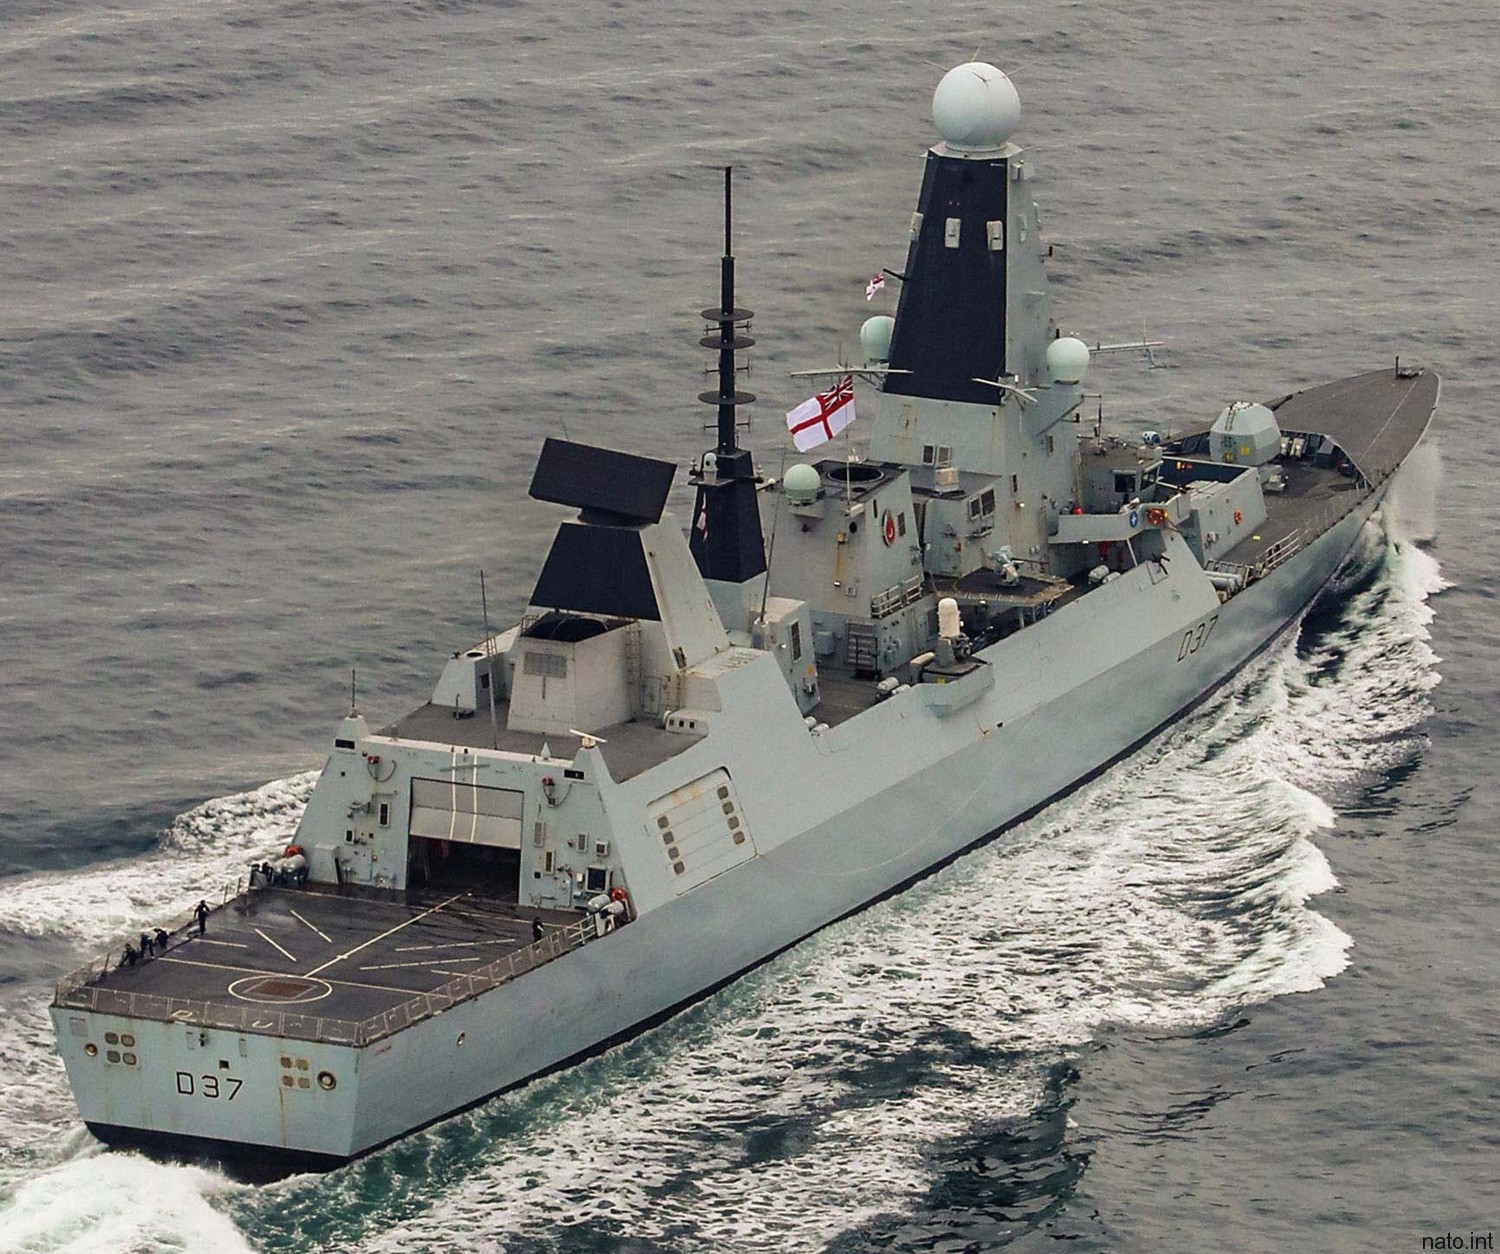 hms duncan d-37 type 45 daring class guided missile destroyer ddg royal navy sea viper paams 33